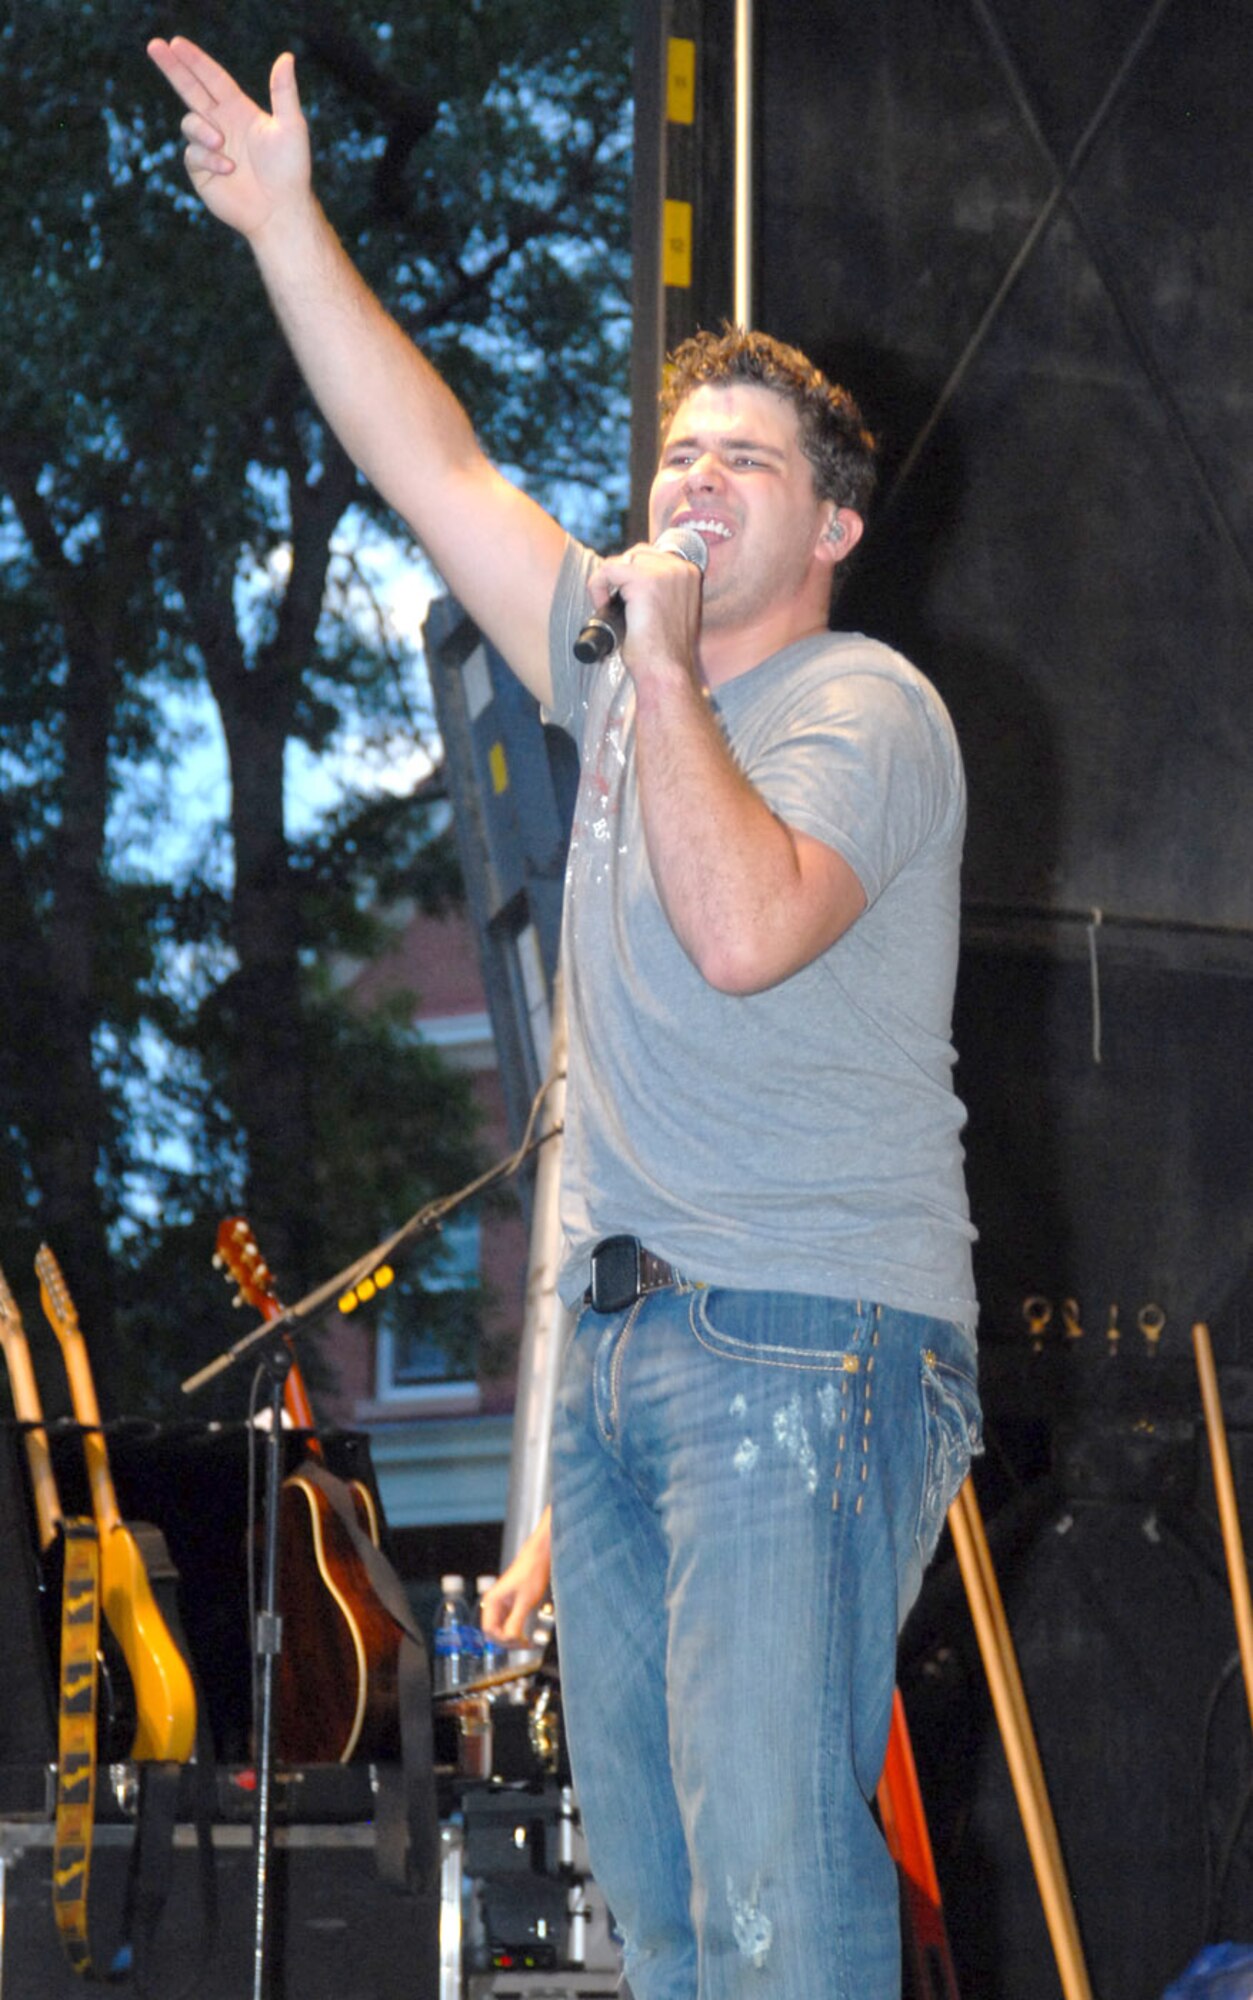 Josh Gracin performs during a free concert in front of Quarters 92 Aug. 15 (Photo by Shelley Raffl).